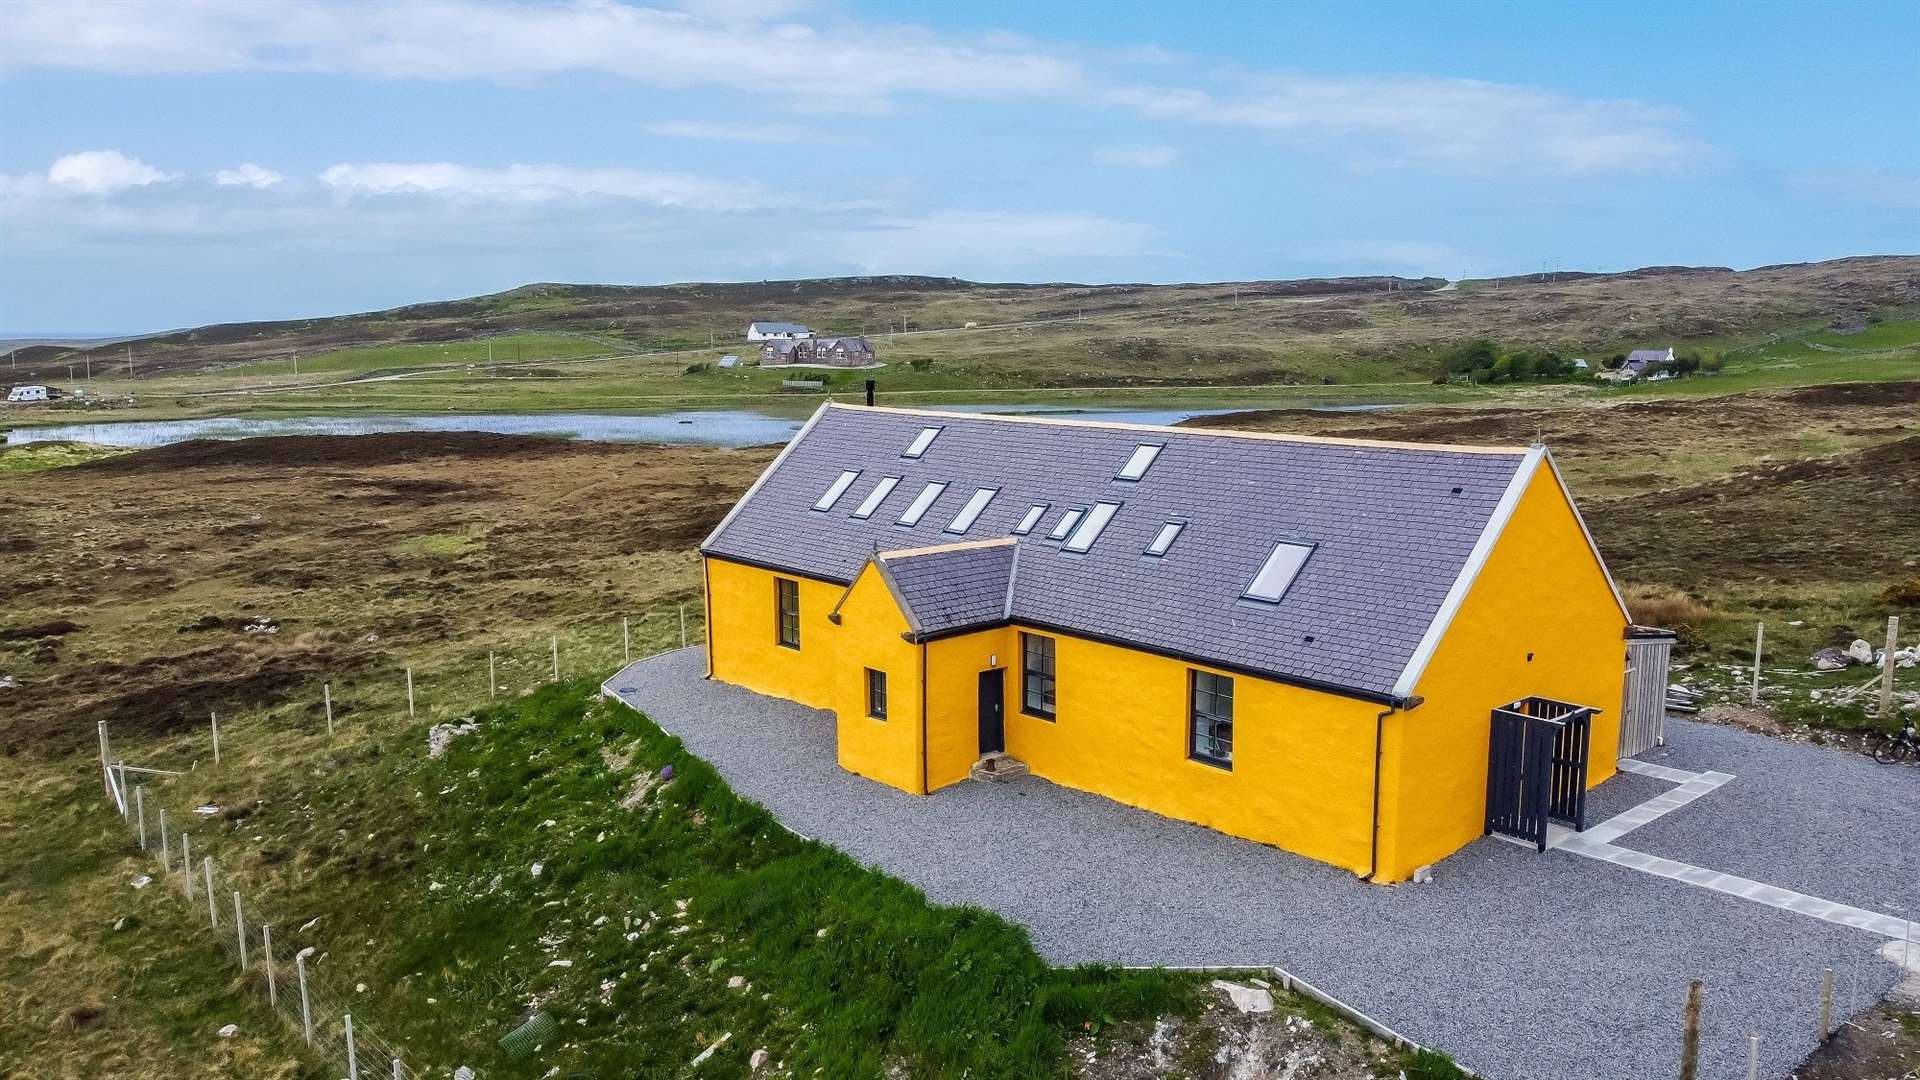 Stoer Hostel is located in the scattered hamlet of Stoer near Lochinver.